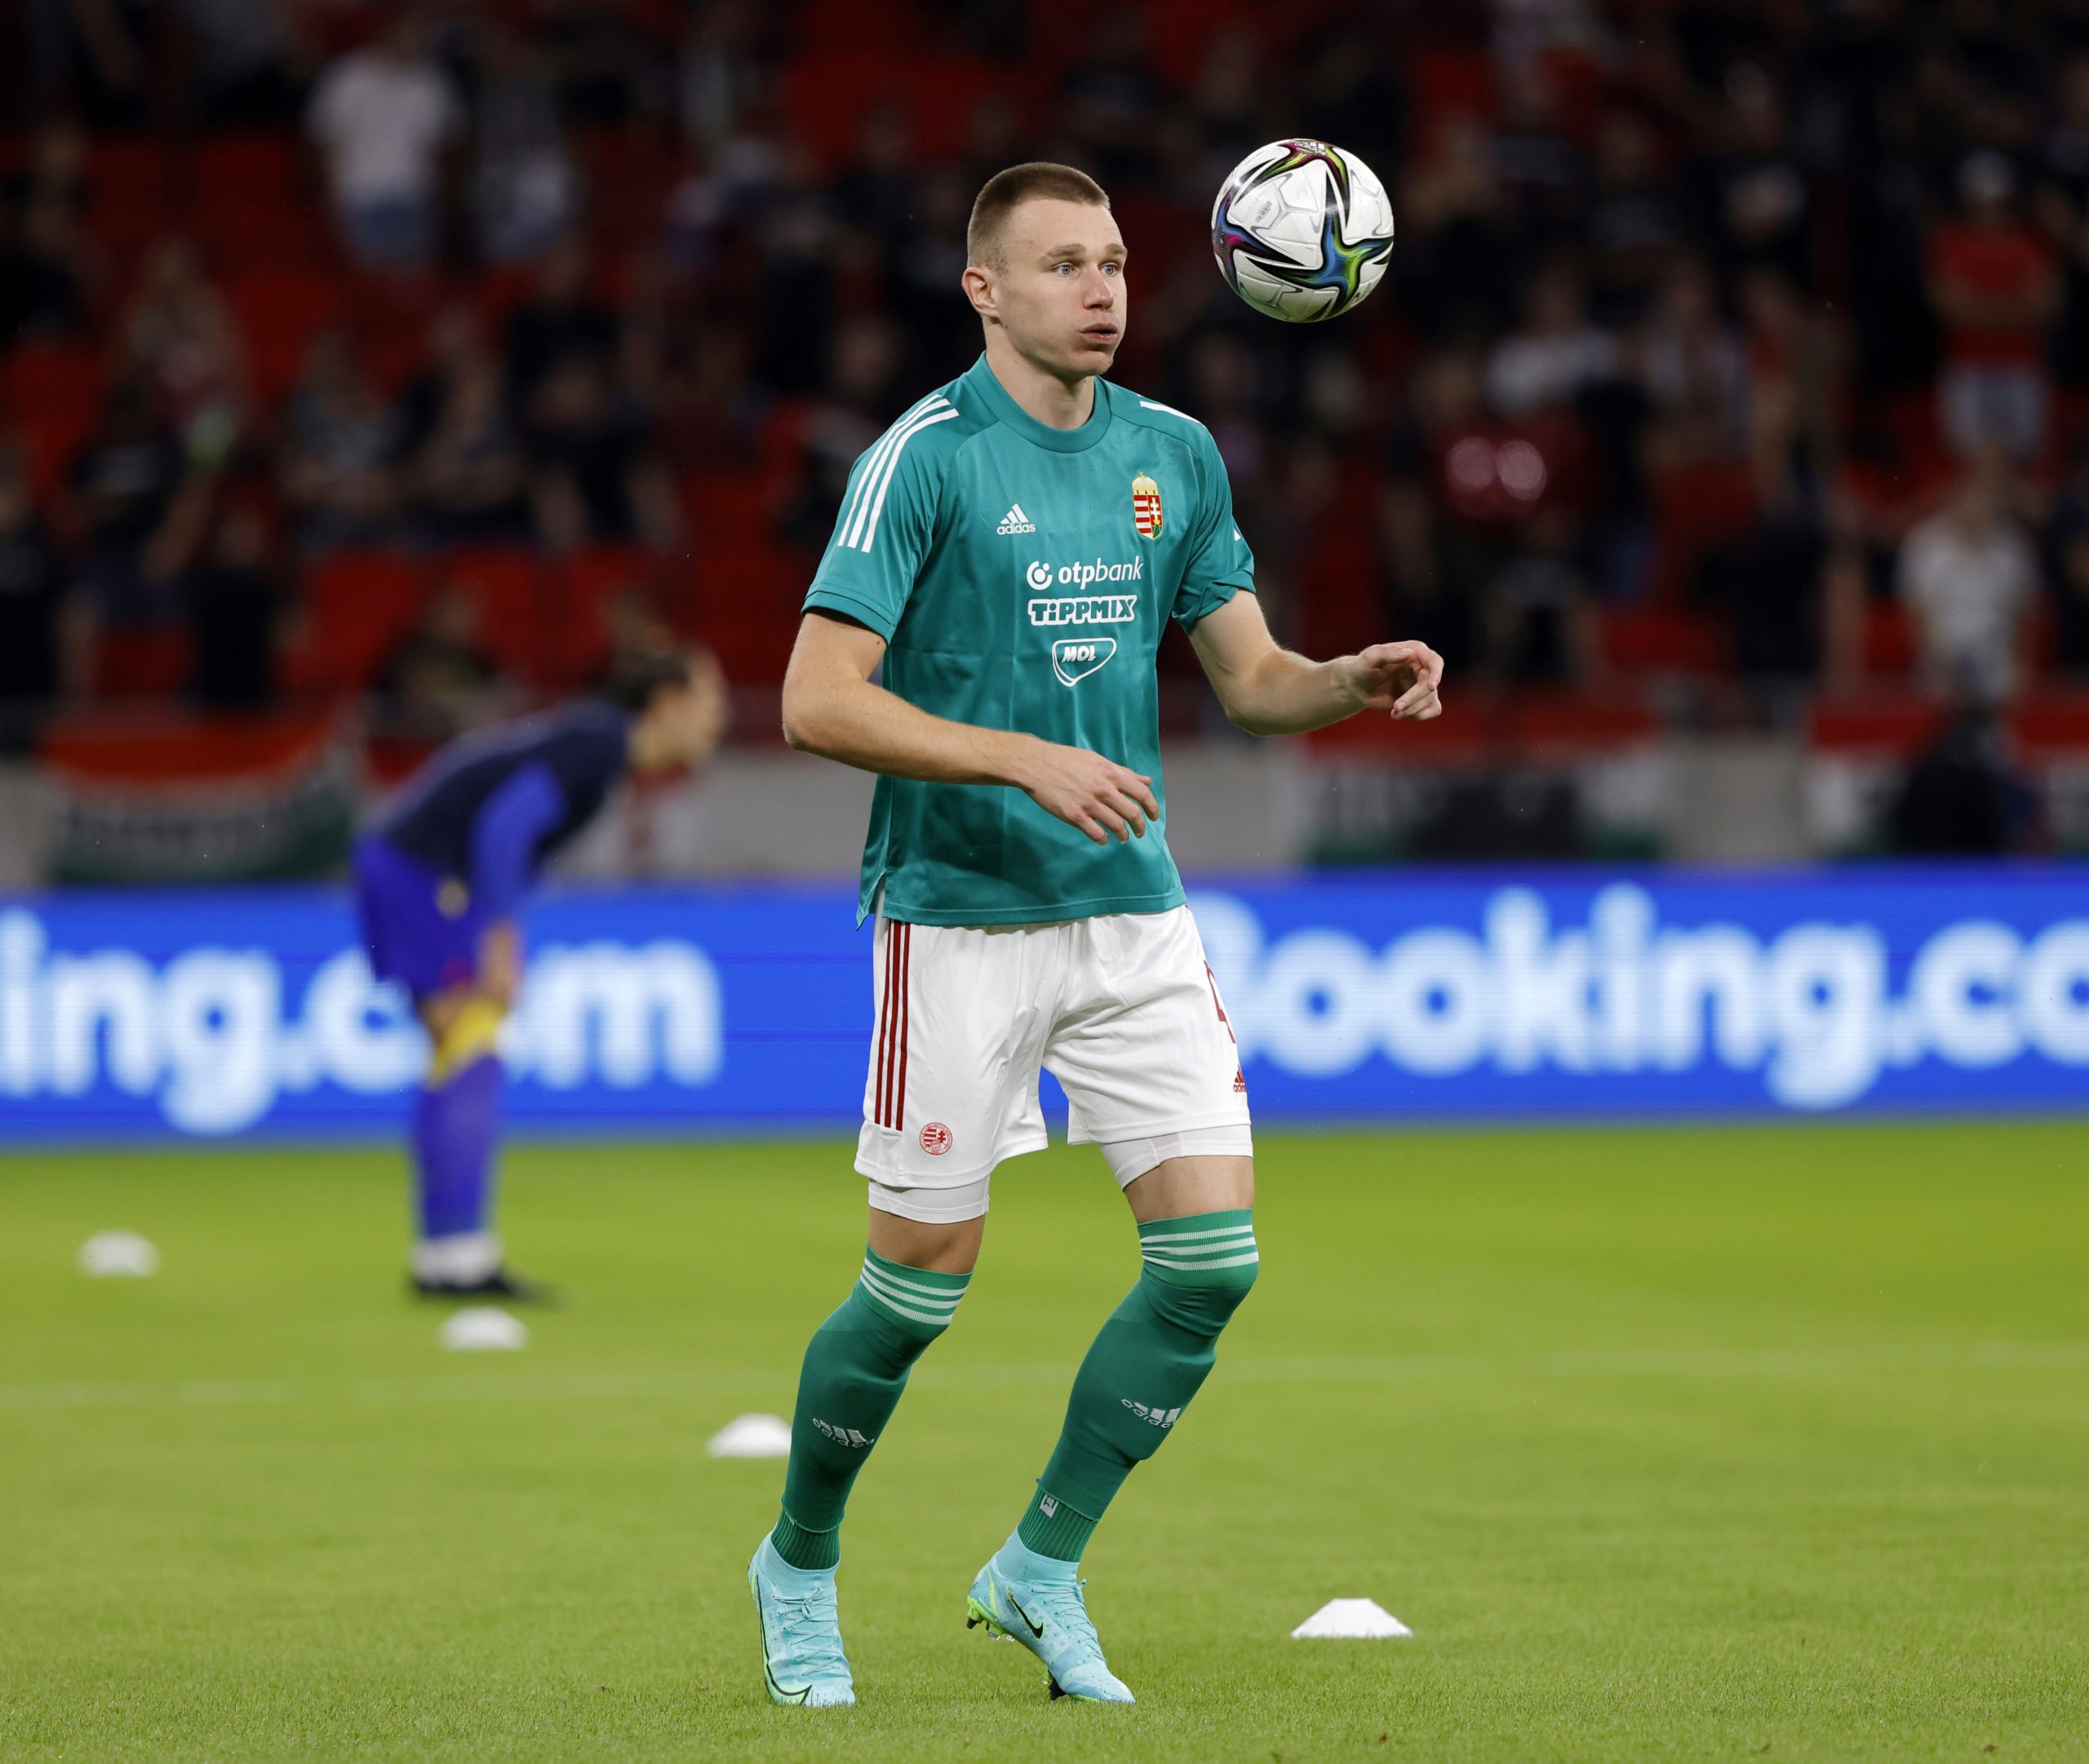 BUDAPEST, HUNGARY - SEPTEMBER 8: Attila Szalai of Hungary warms up prior to the FIFA World Cup 2022 Qatar qualifying match between Hungary and Andorra at Puskas Arena on September 8, 2021 in Budapest, Hungary. (Photo by Laszlo Szirtesi/Getty Images)
The 4th Official uses images provided by the following image agency: Getty Images (https://www.gettyimages.de/) Imago Images (https://www.imago-images.de/)